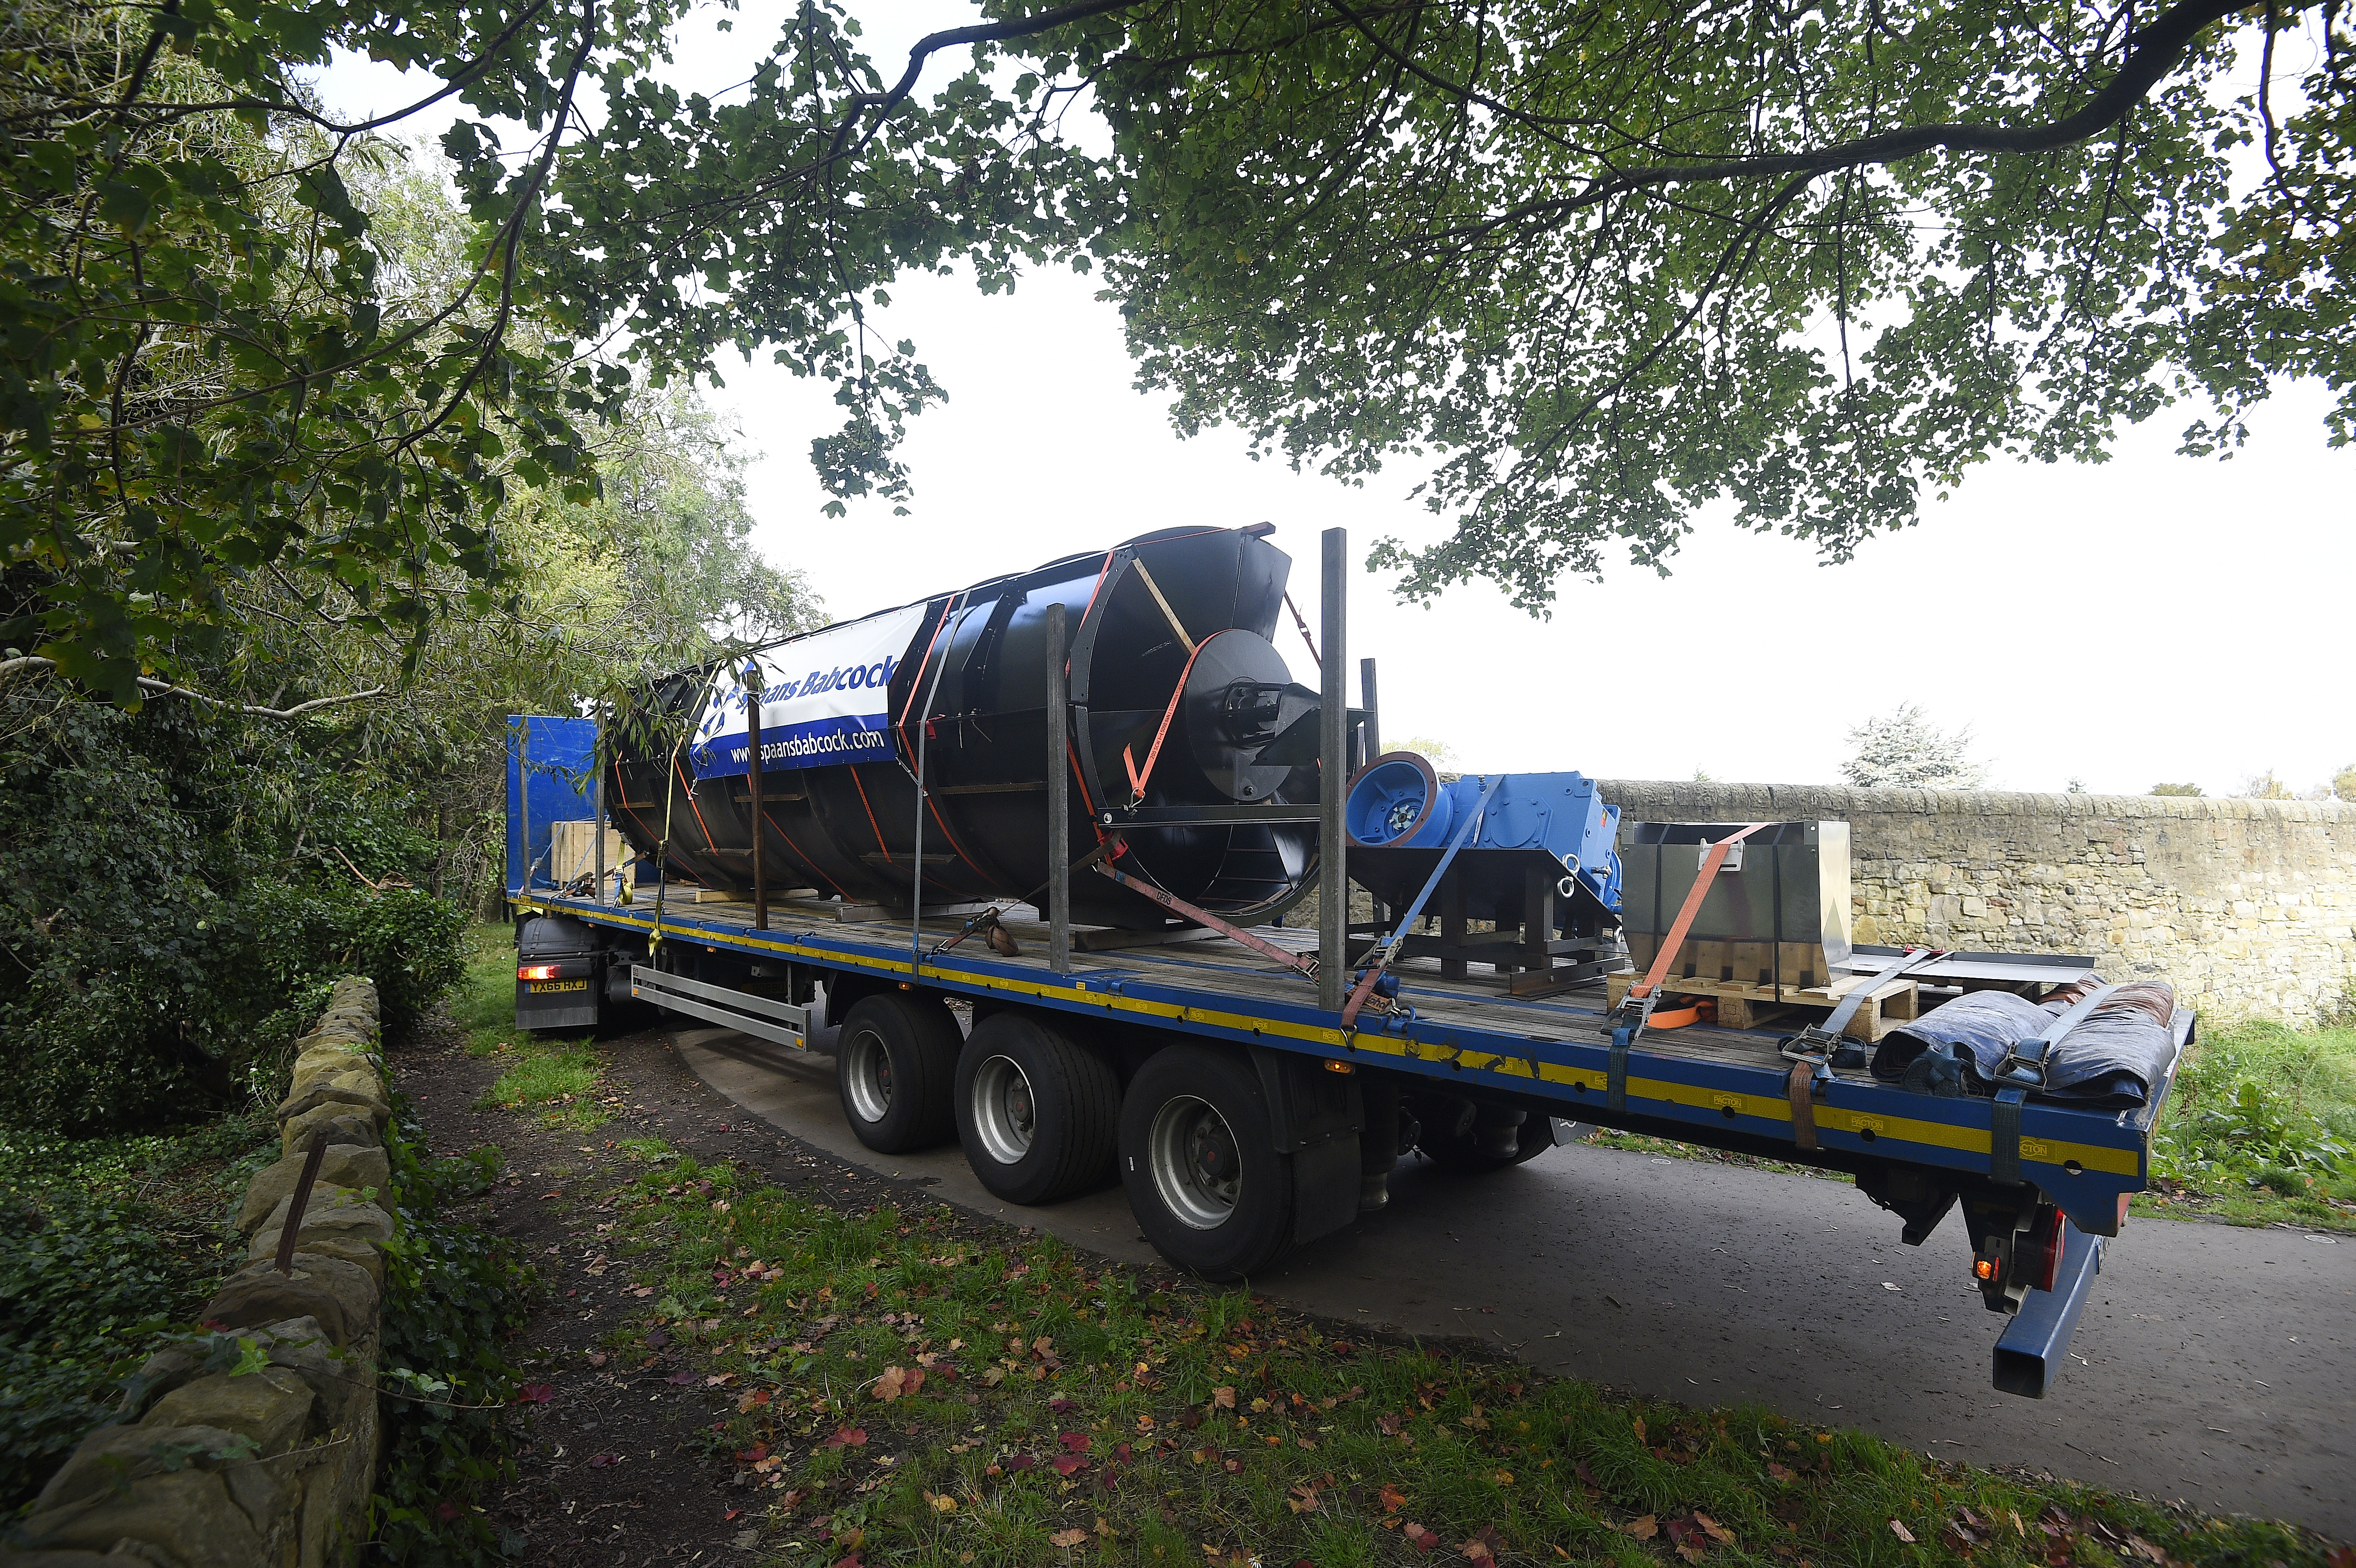 In Pictures: Archimedes screw hoisted into place at Saughton Park micro-hydro scheme